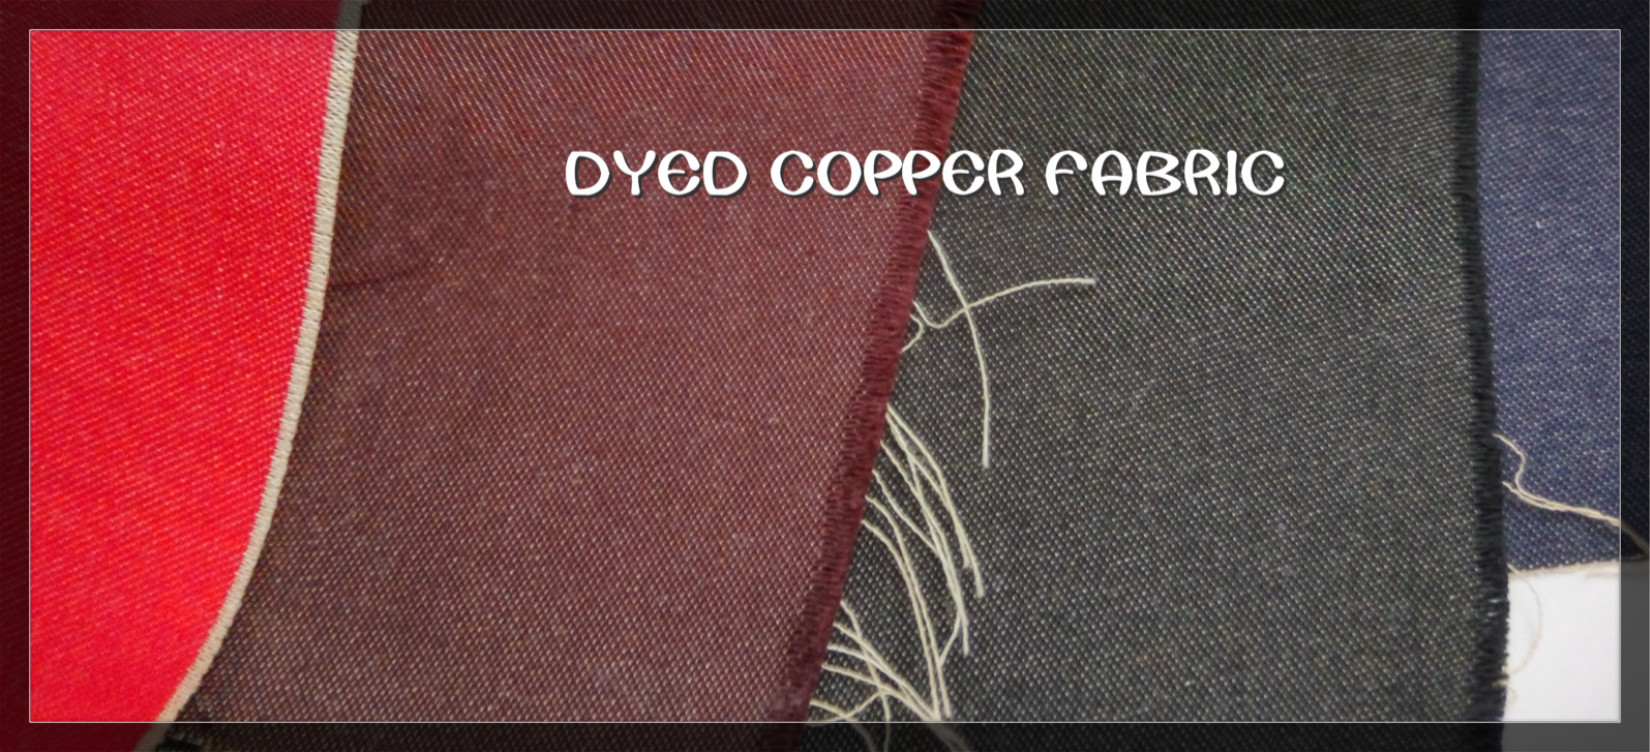 Dyed copper fabric